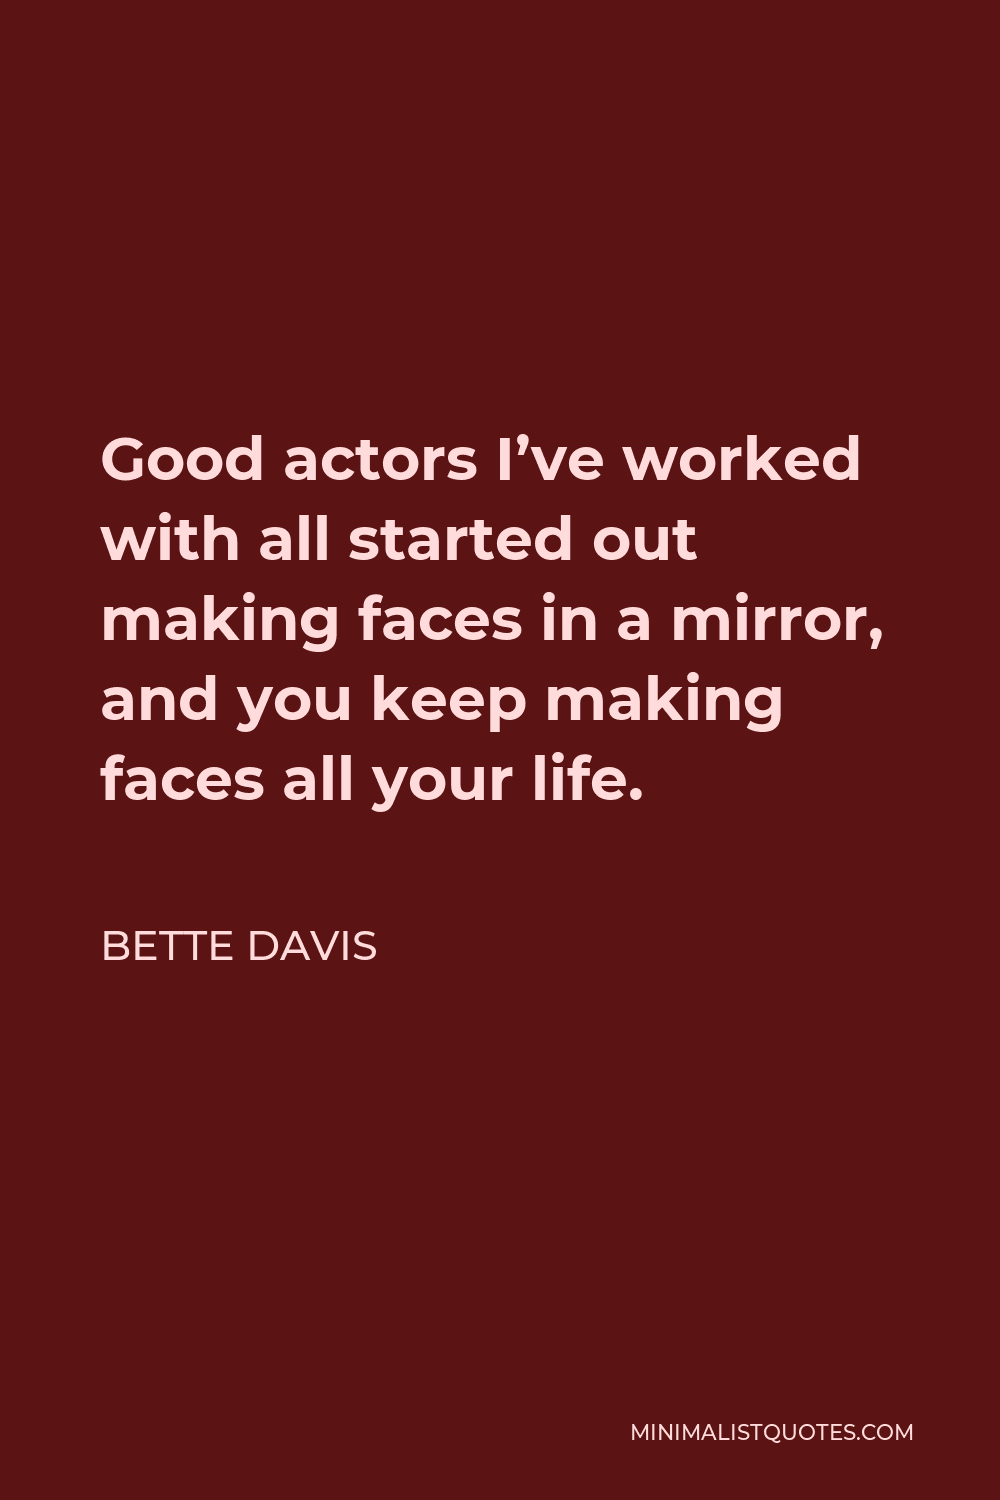 Bette Davis Quote - Good actors I’ve worked with all started out making faces in a mirror, and you keep making faces all your life.